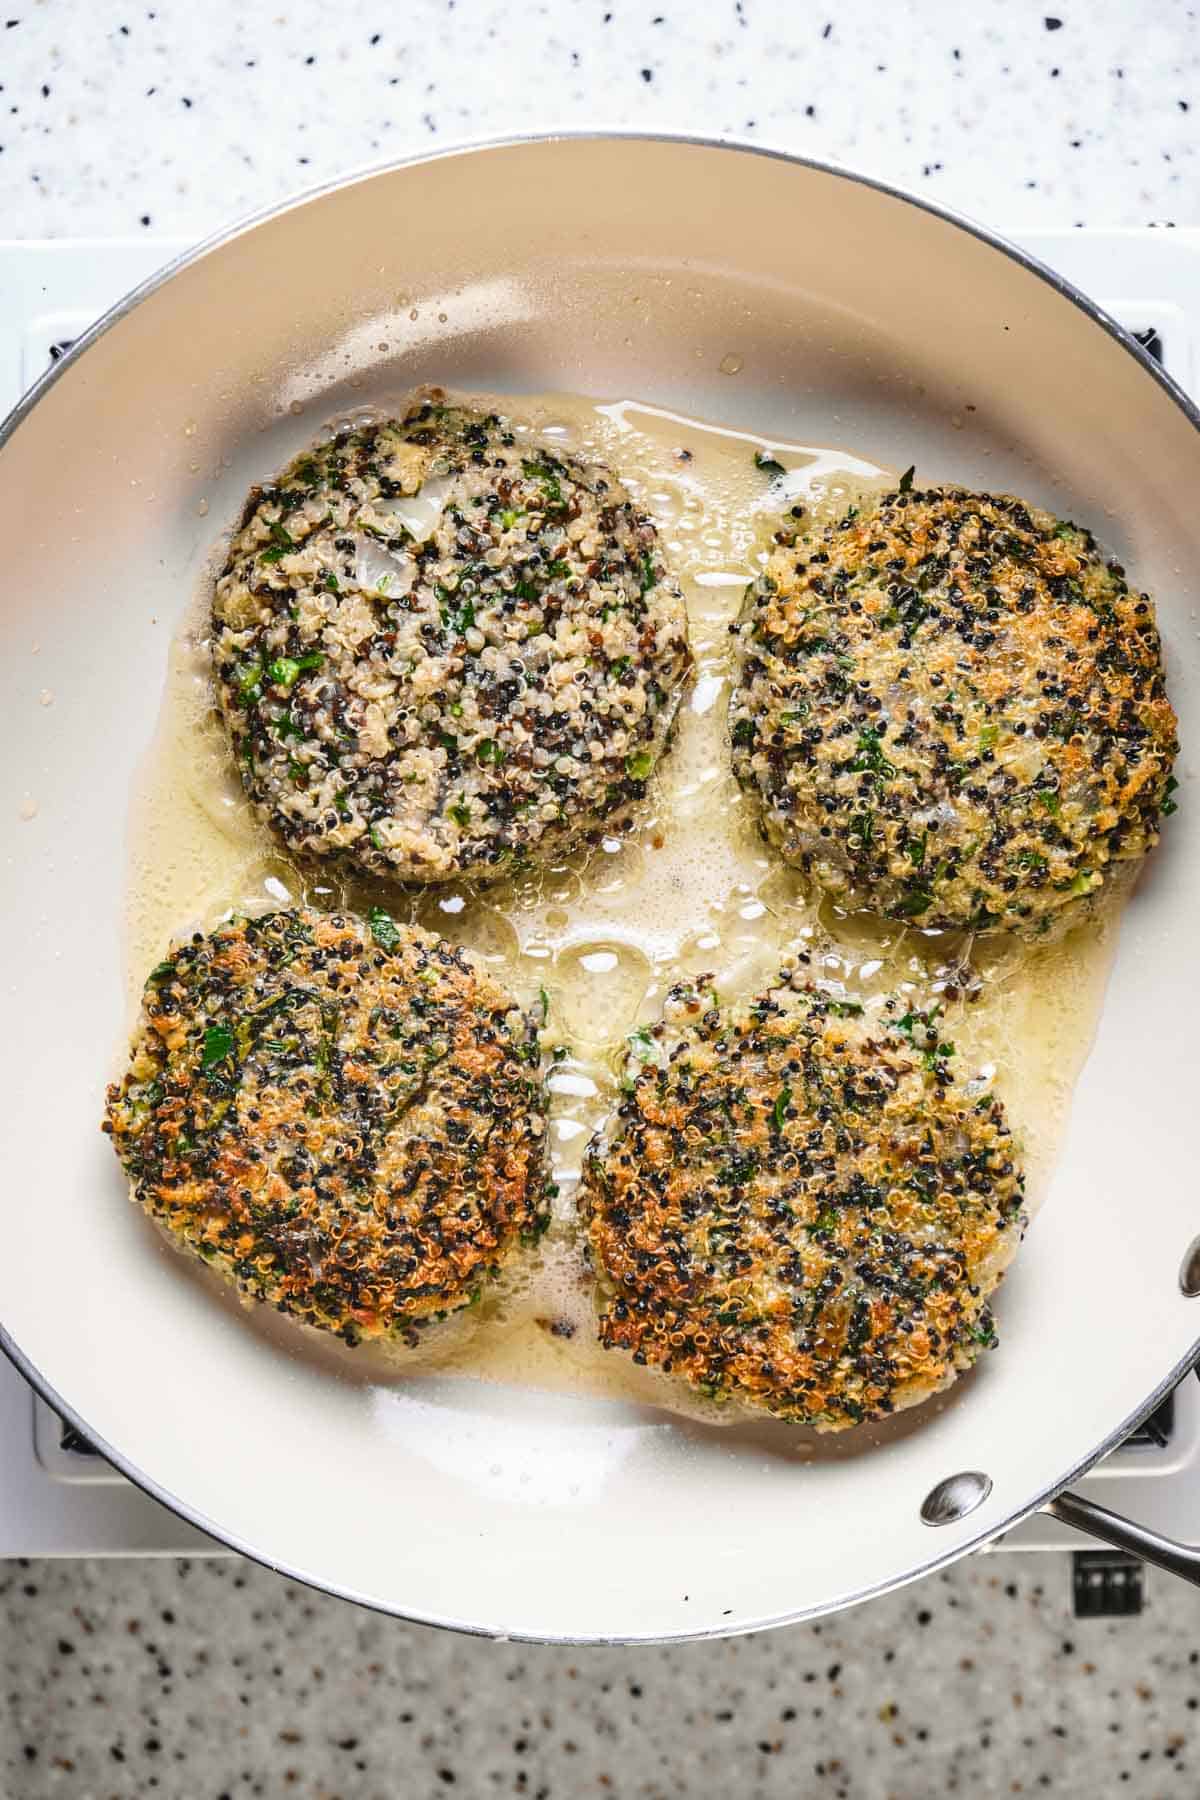 Kale and quinoa cakes crisped and browned in a frying pan.